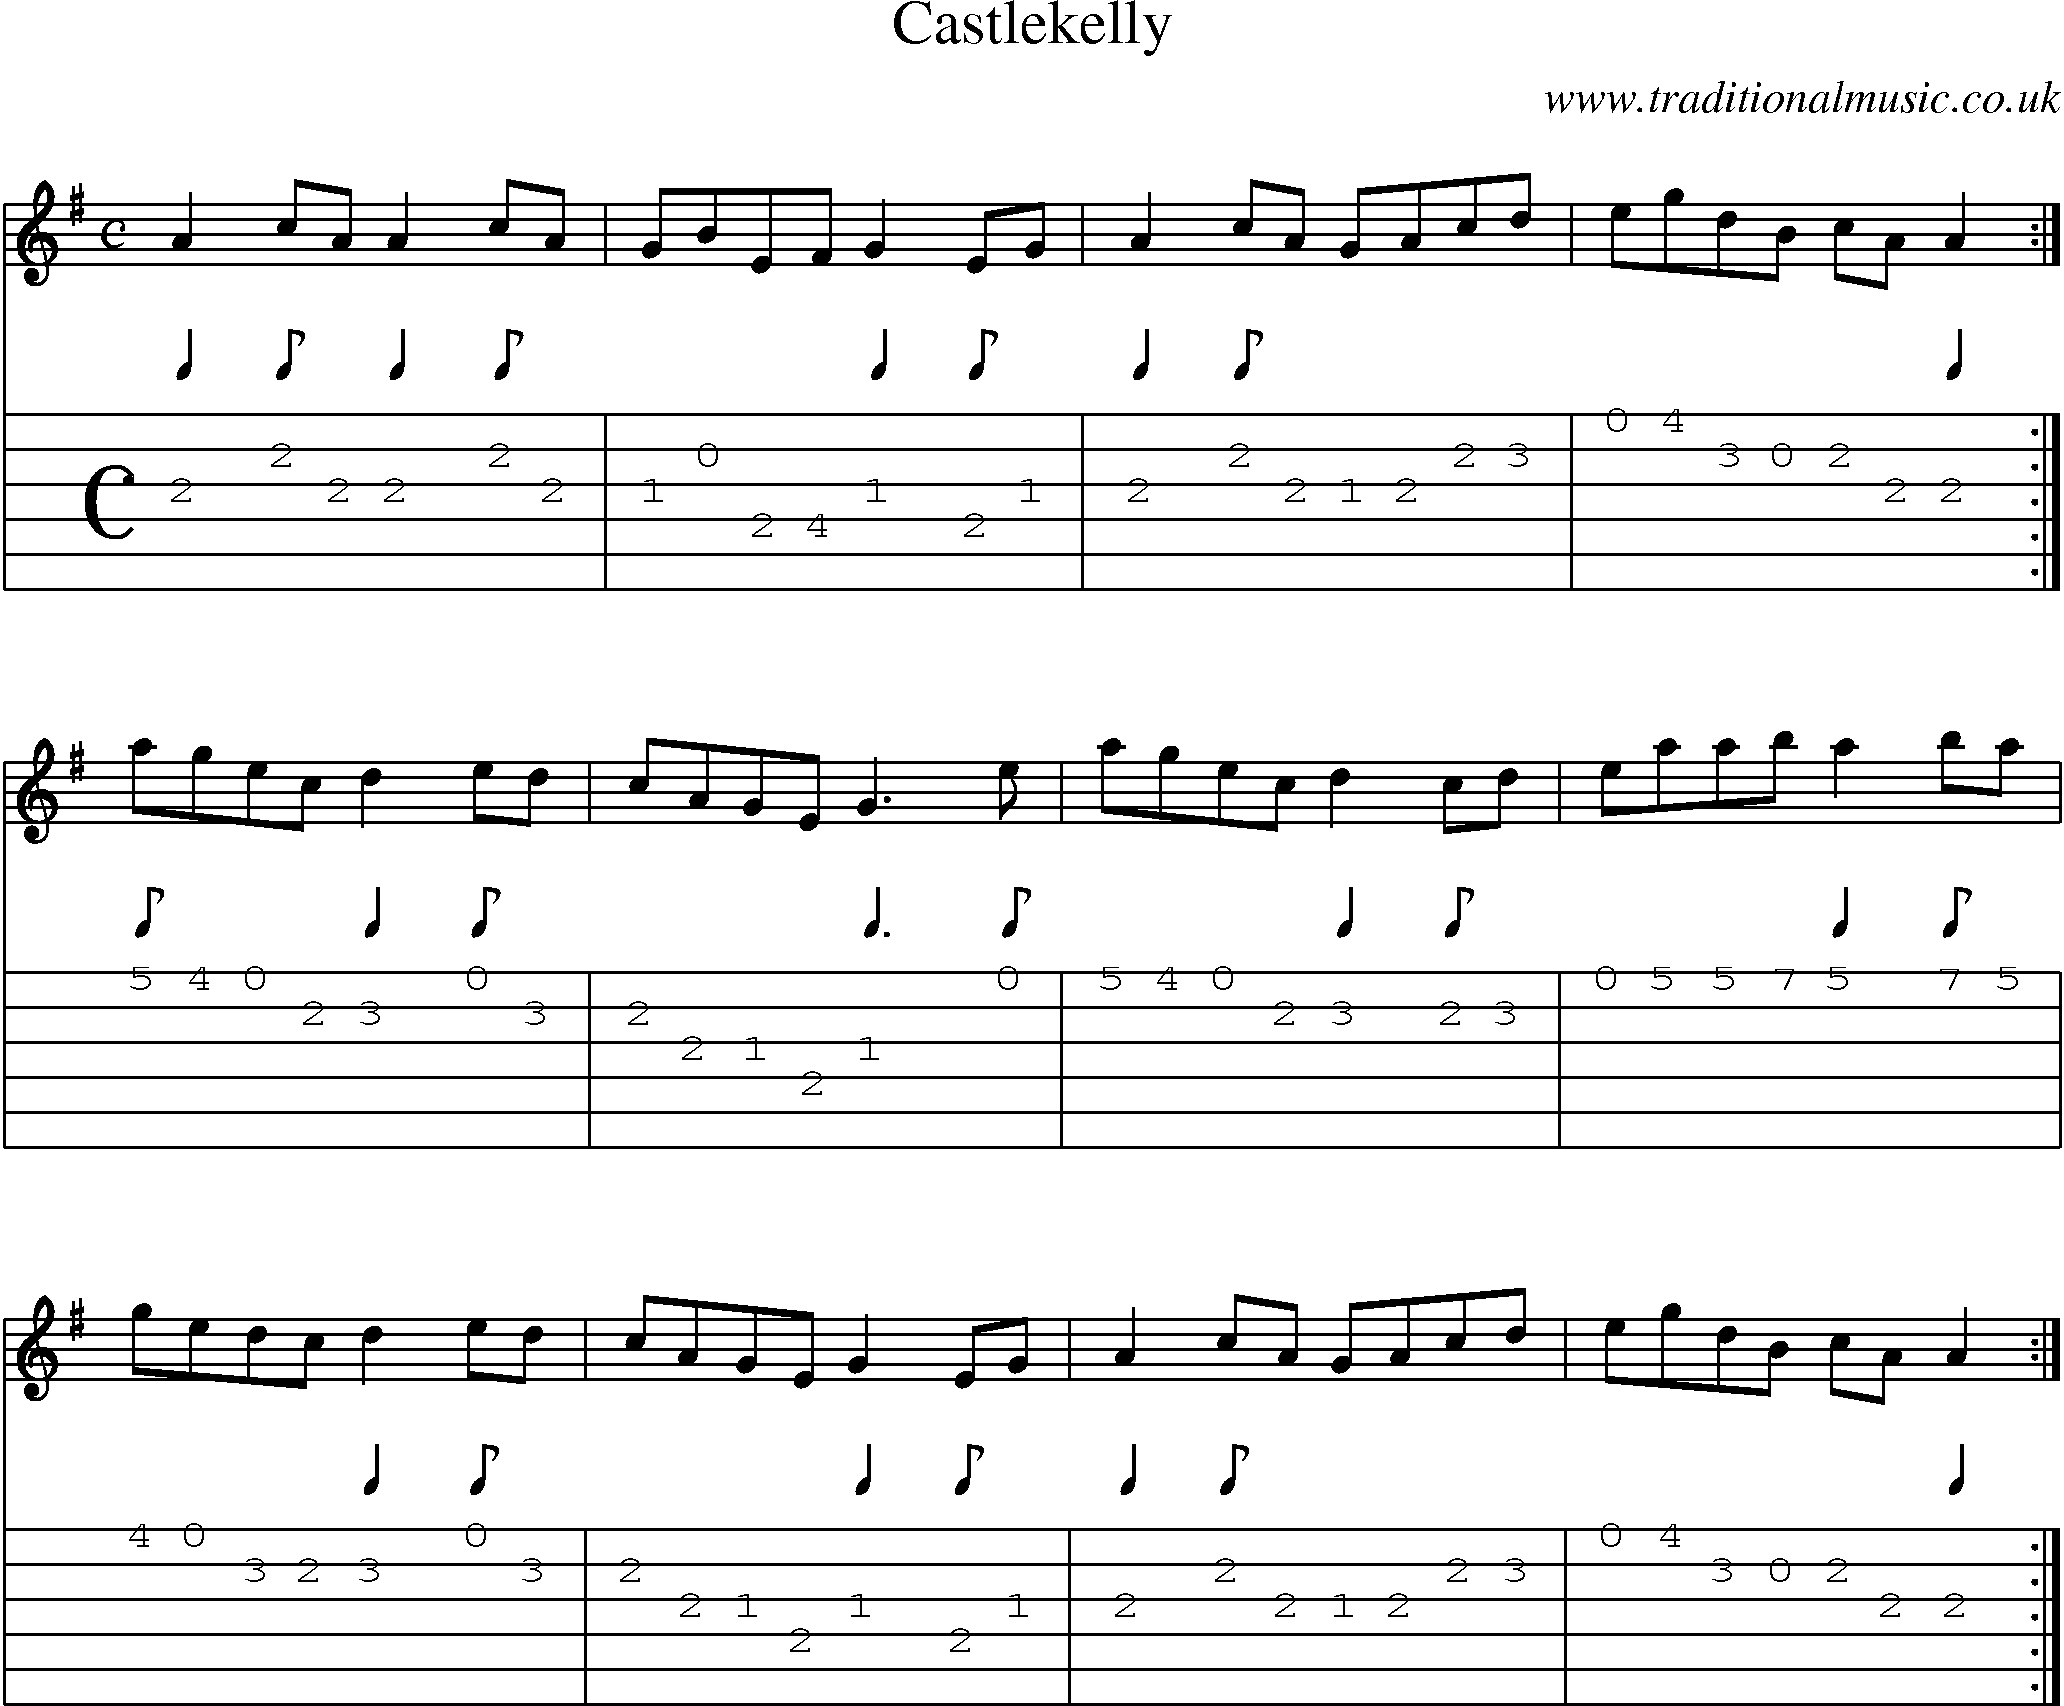 Music Score and Guitar Tabs for Castlekelly